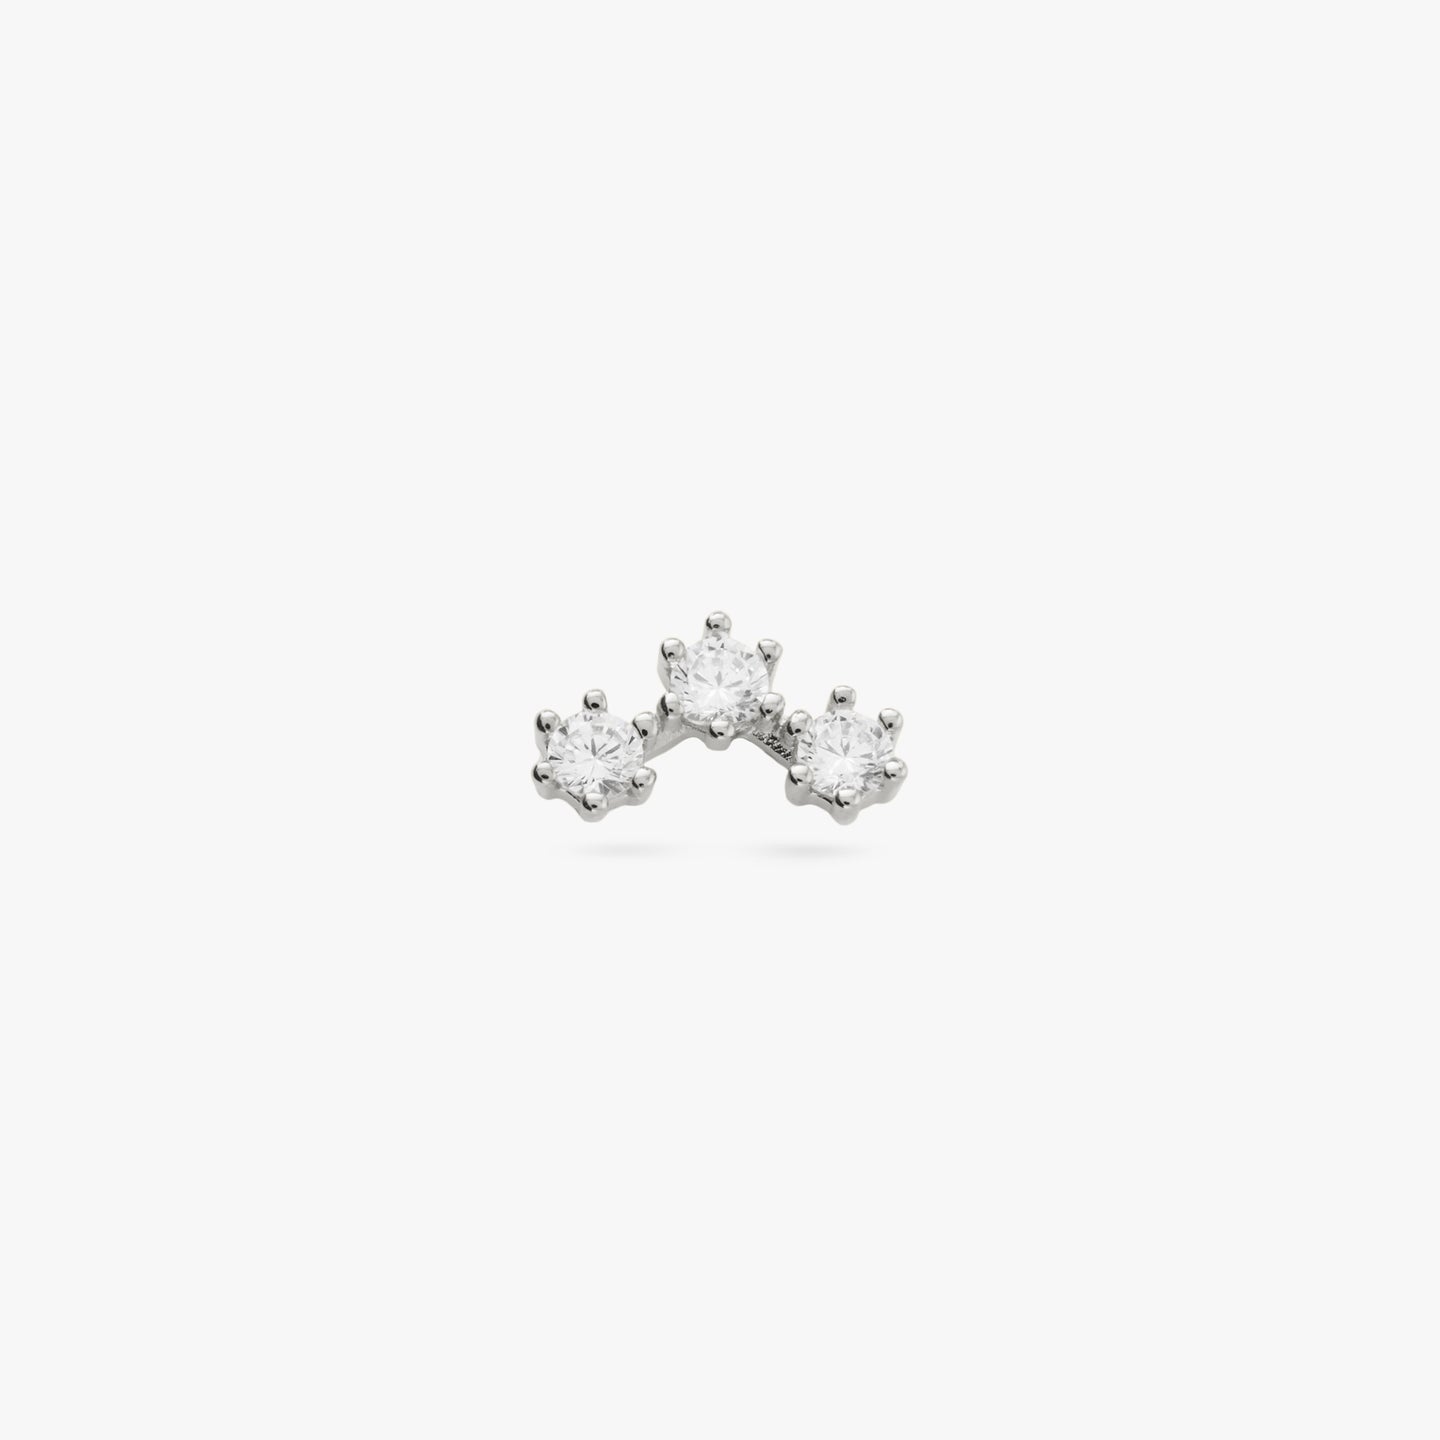 Three cubic zirconia in an arch shaped silver cluster stud color:null|silver/clear